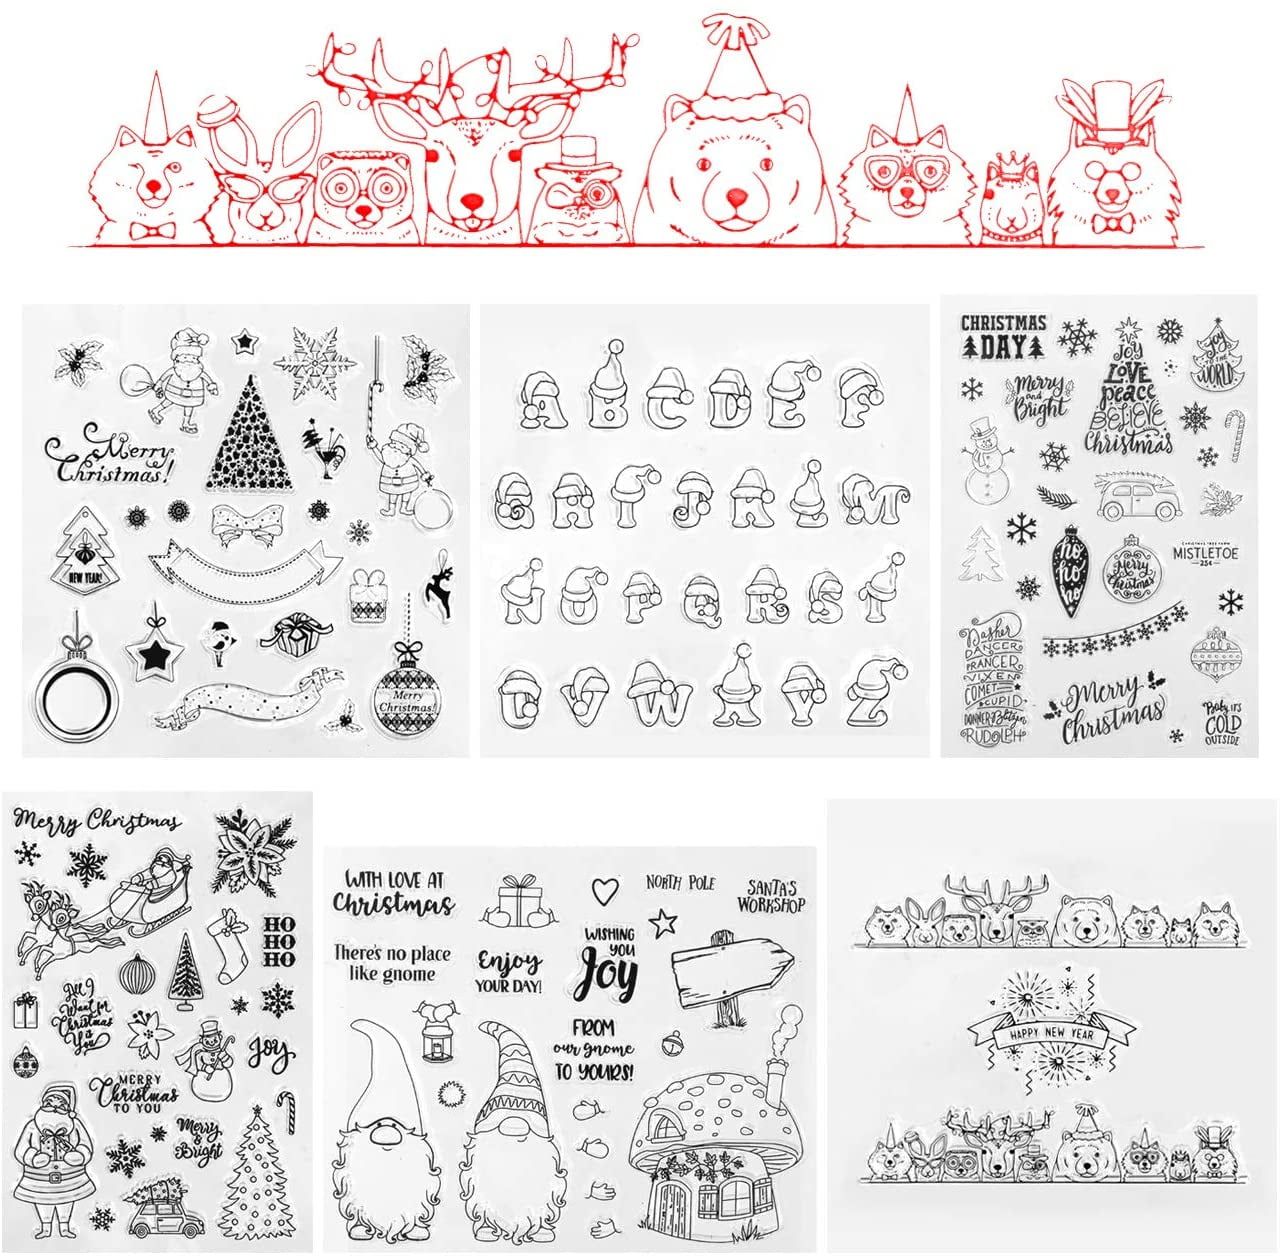 Christmas Snowflake Clear Stamps for Card Making Cup Cat Mouse Bear Penguin Star Clear Rubber Stamps with Sentiment Words for Holiday Card Making DIY Photo Album DIY Scrapbooking Journaling 